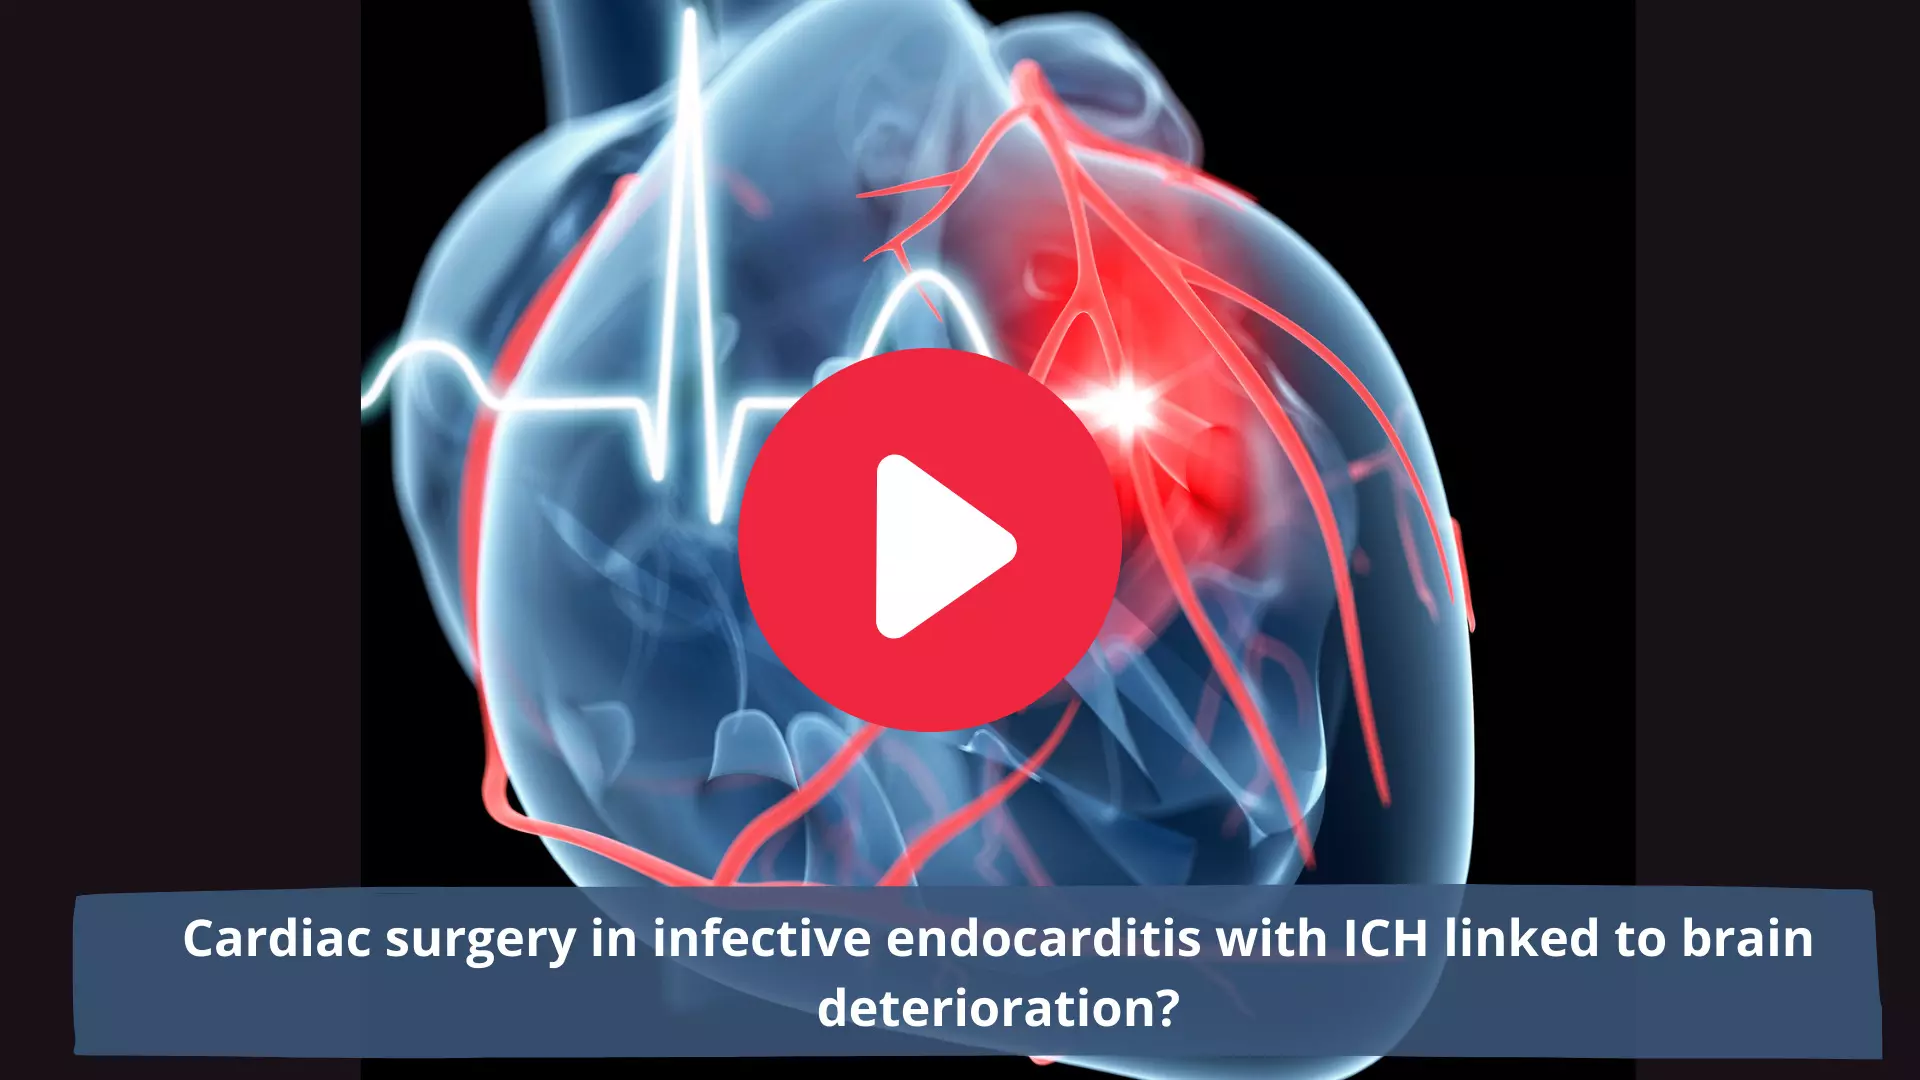 Cardiac surgery in infective endocarditis with ICH linked to brain deterioration?